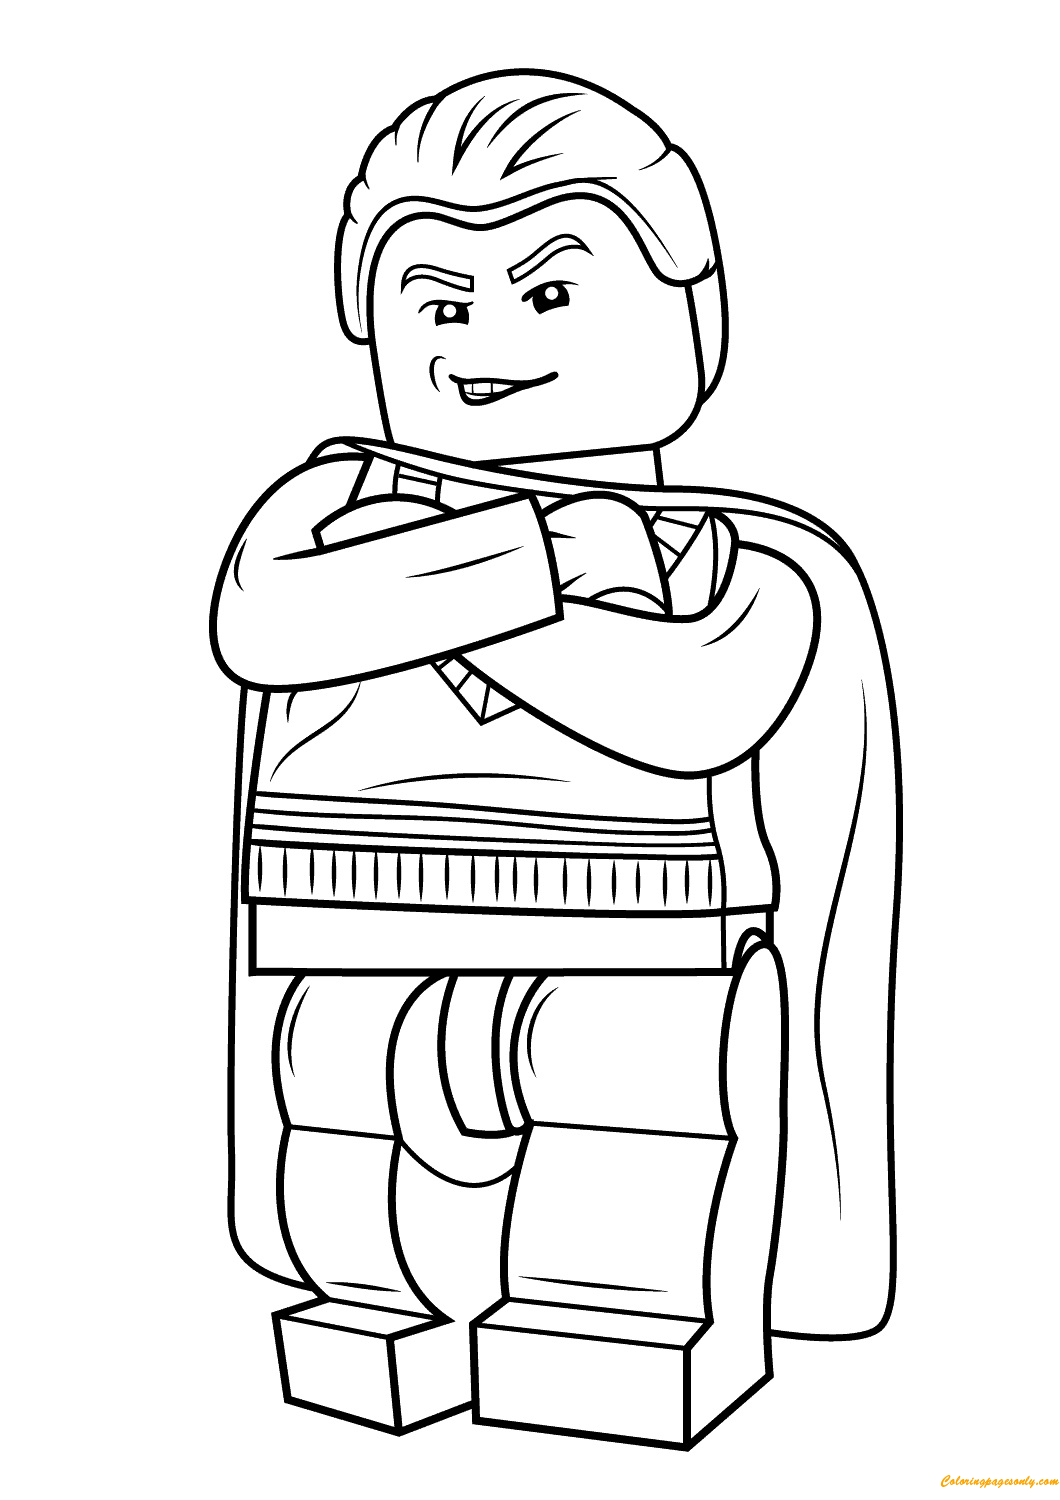 Lego Harry Potter Draco Malfoy Coloring Pages - Lego Coloring Pages - Coloring  Pages For Kids And Adults